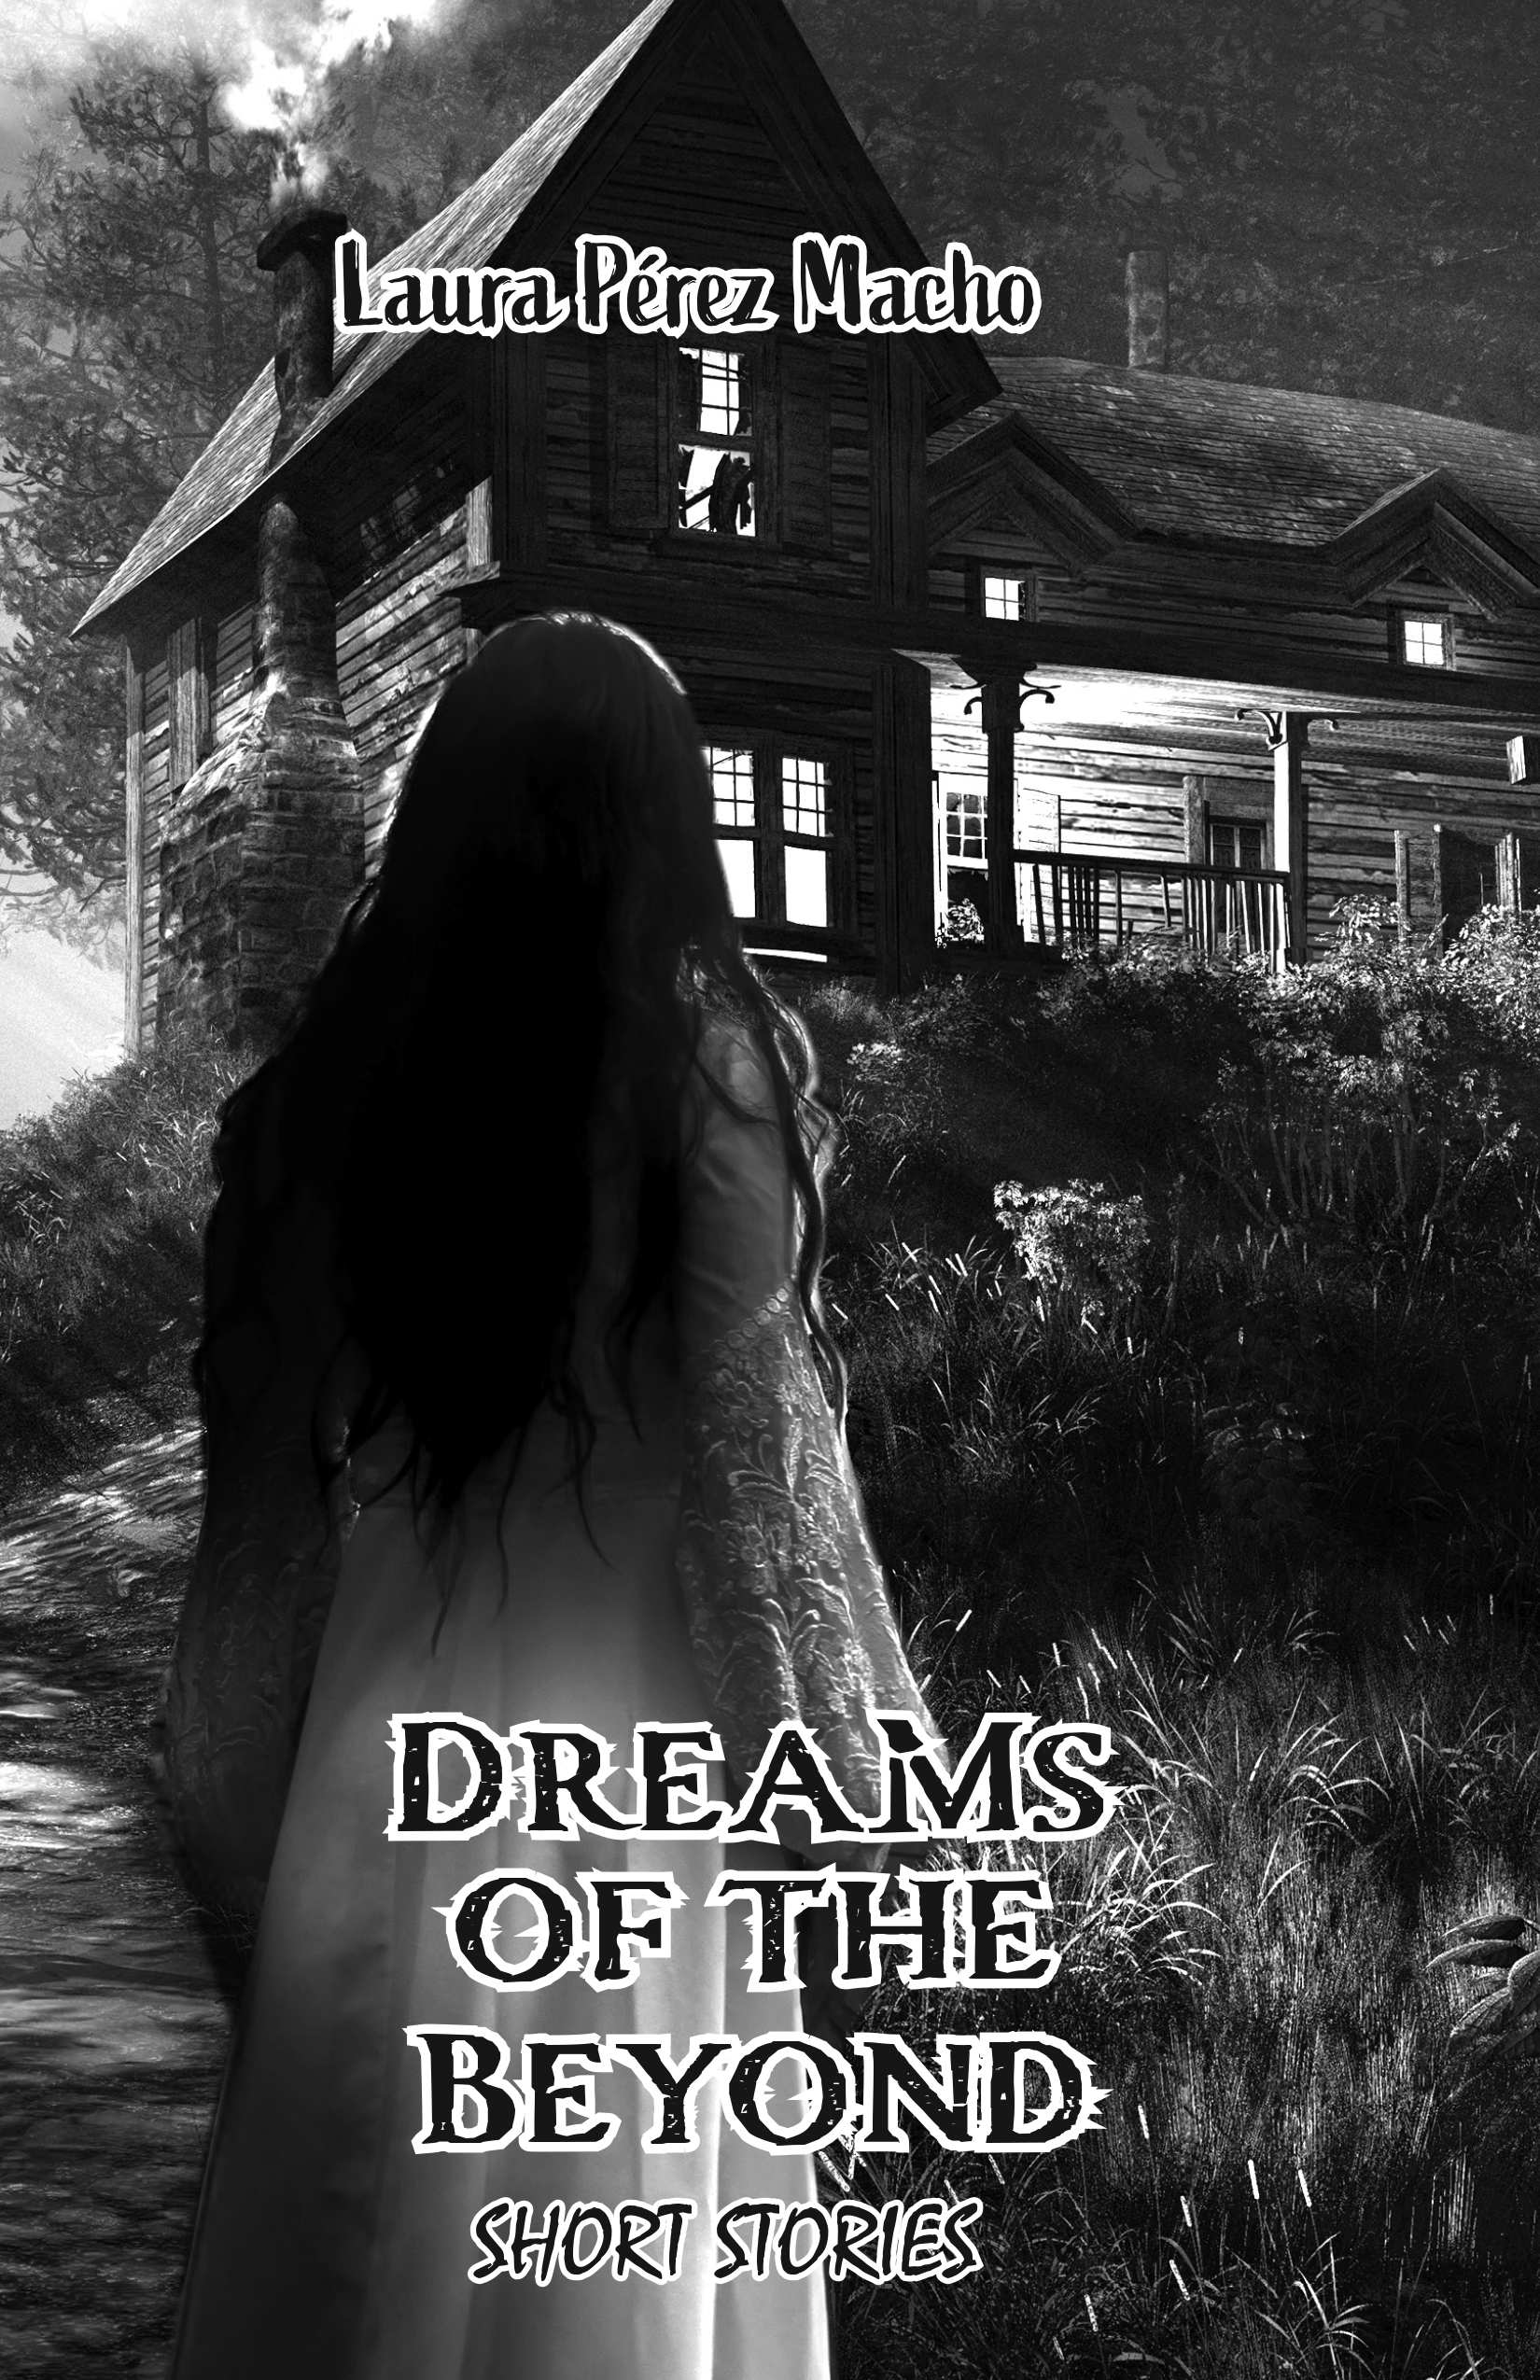 Dreams of the beyond: short stories cover - written by Laura Pérez Macho